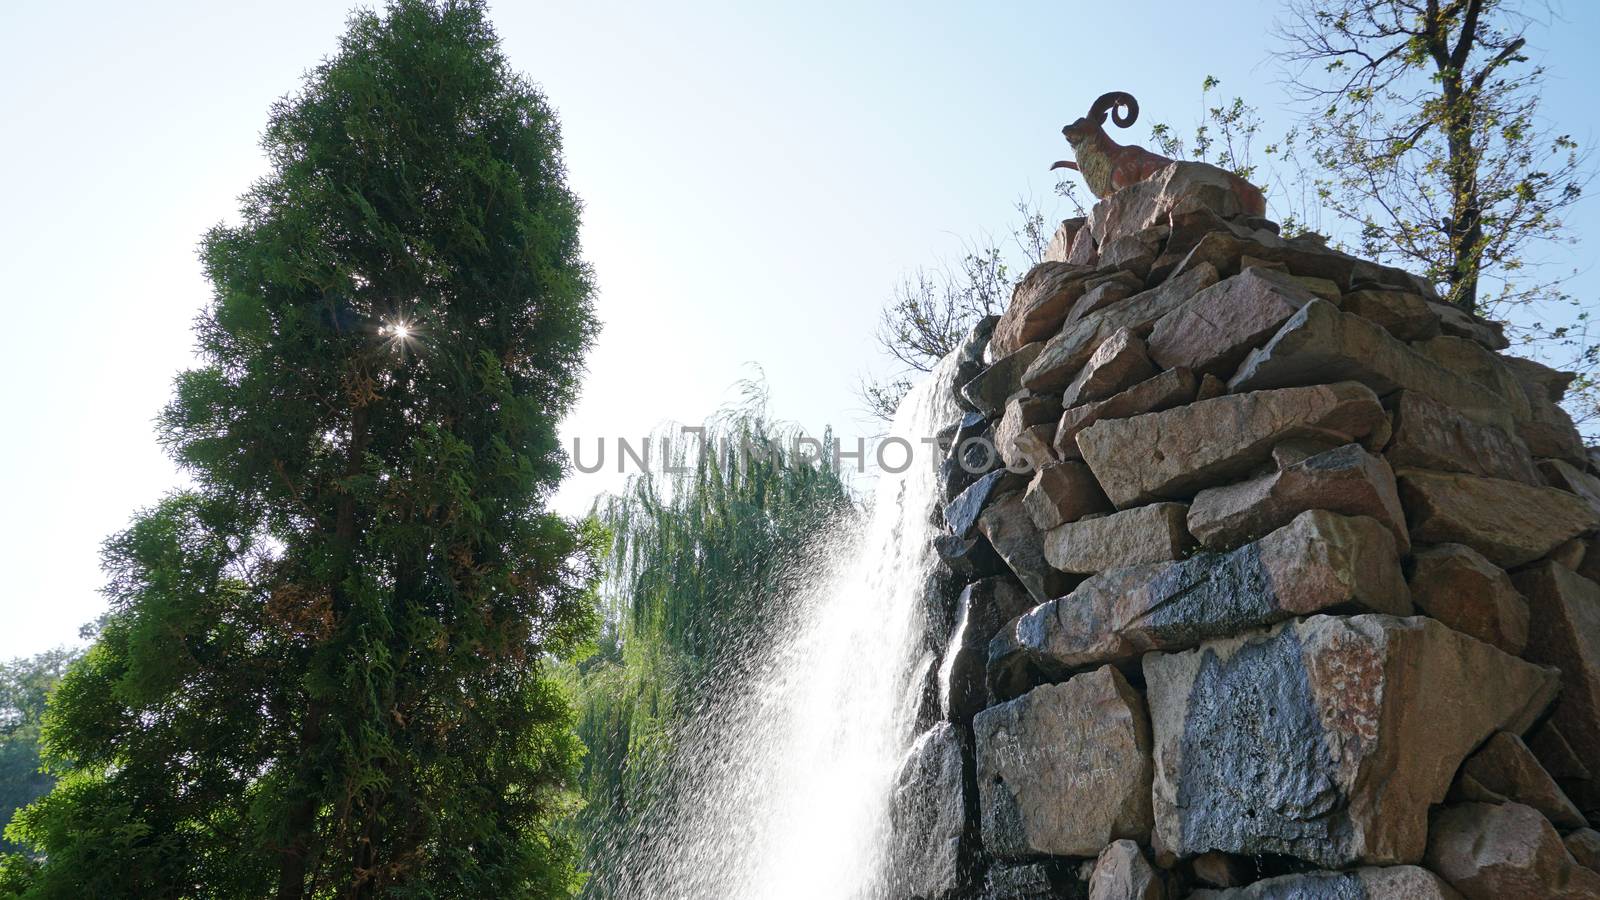 Artificial waterfall with a statue in the city Park of Almaty. Mountain sheep stands on the high stones of the waterfall, water flows into the bowl. Green trees and sky all around.